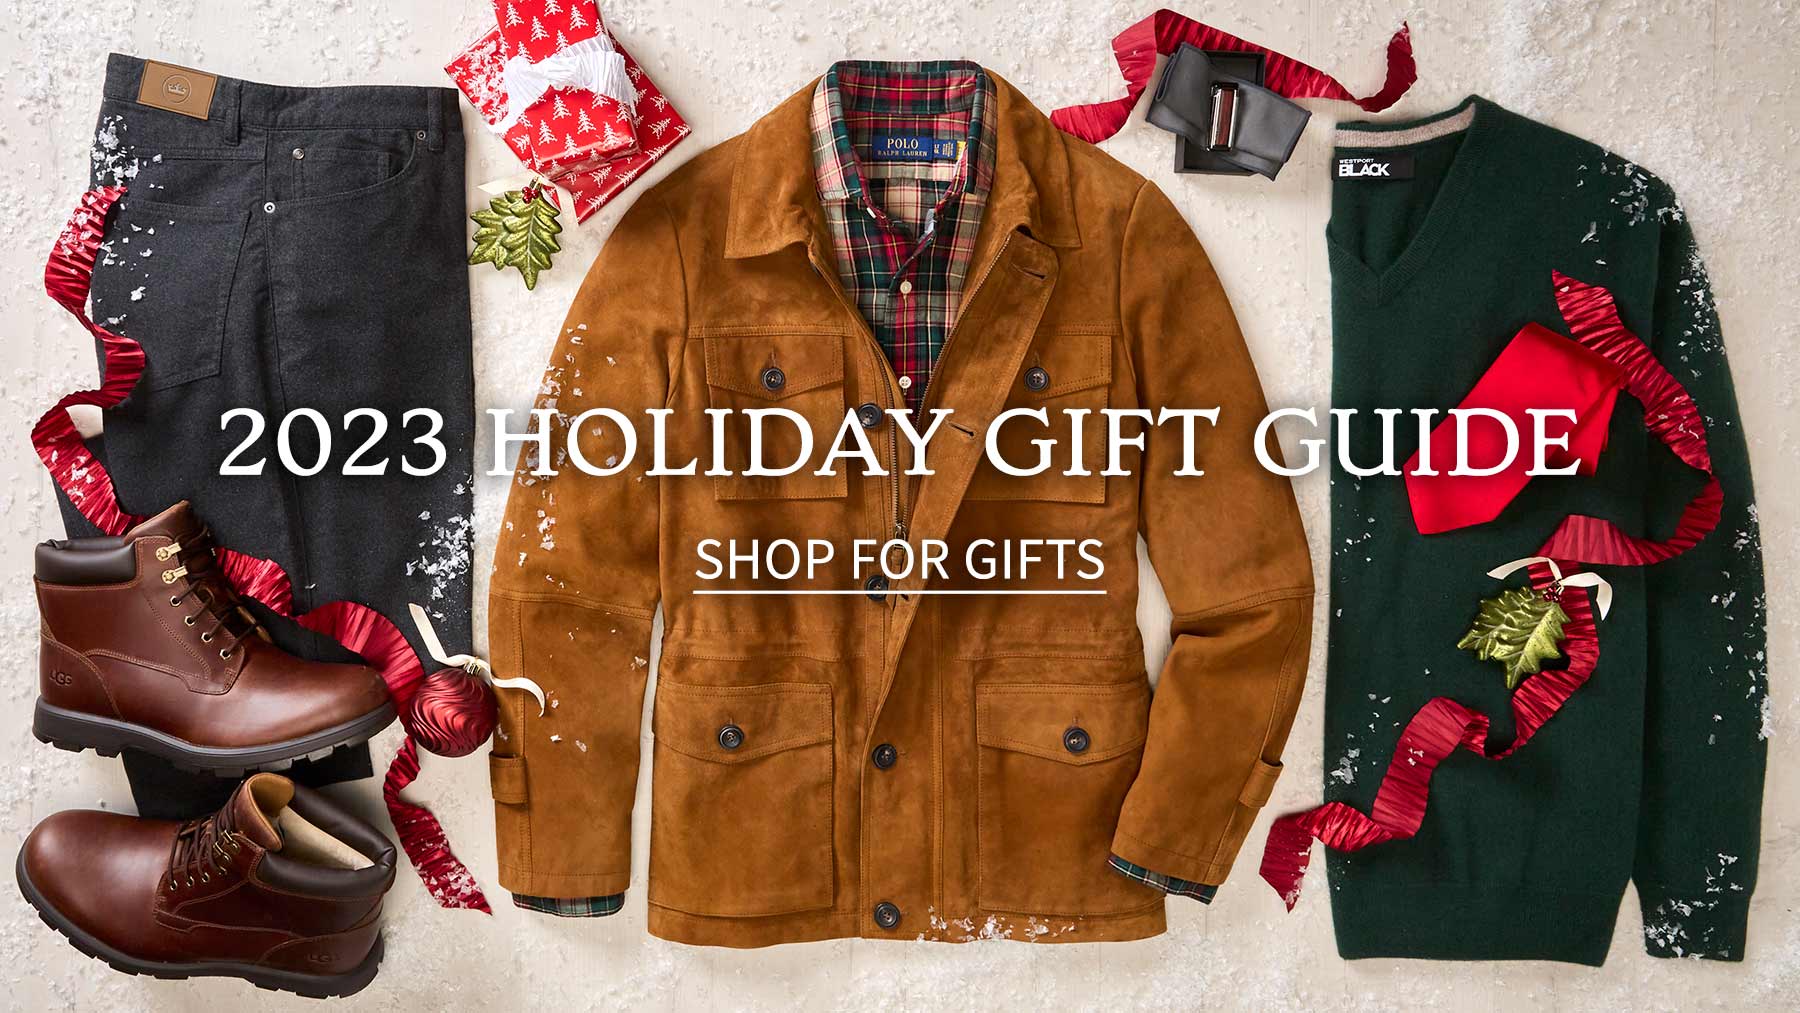 2023 Holiday Gift Guide - Shop for gifts